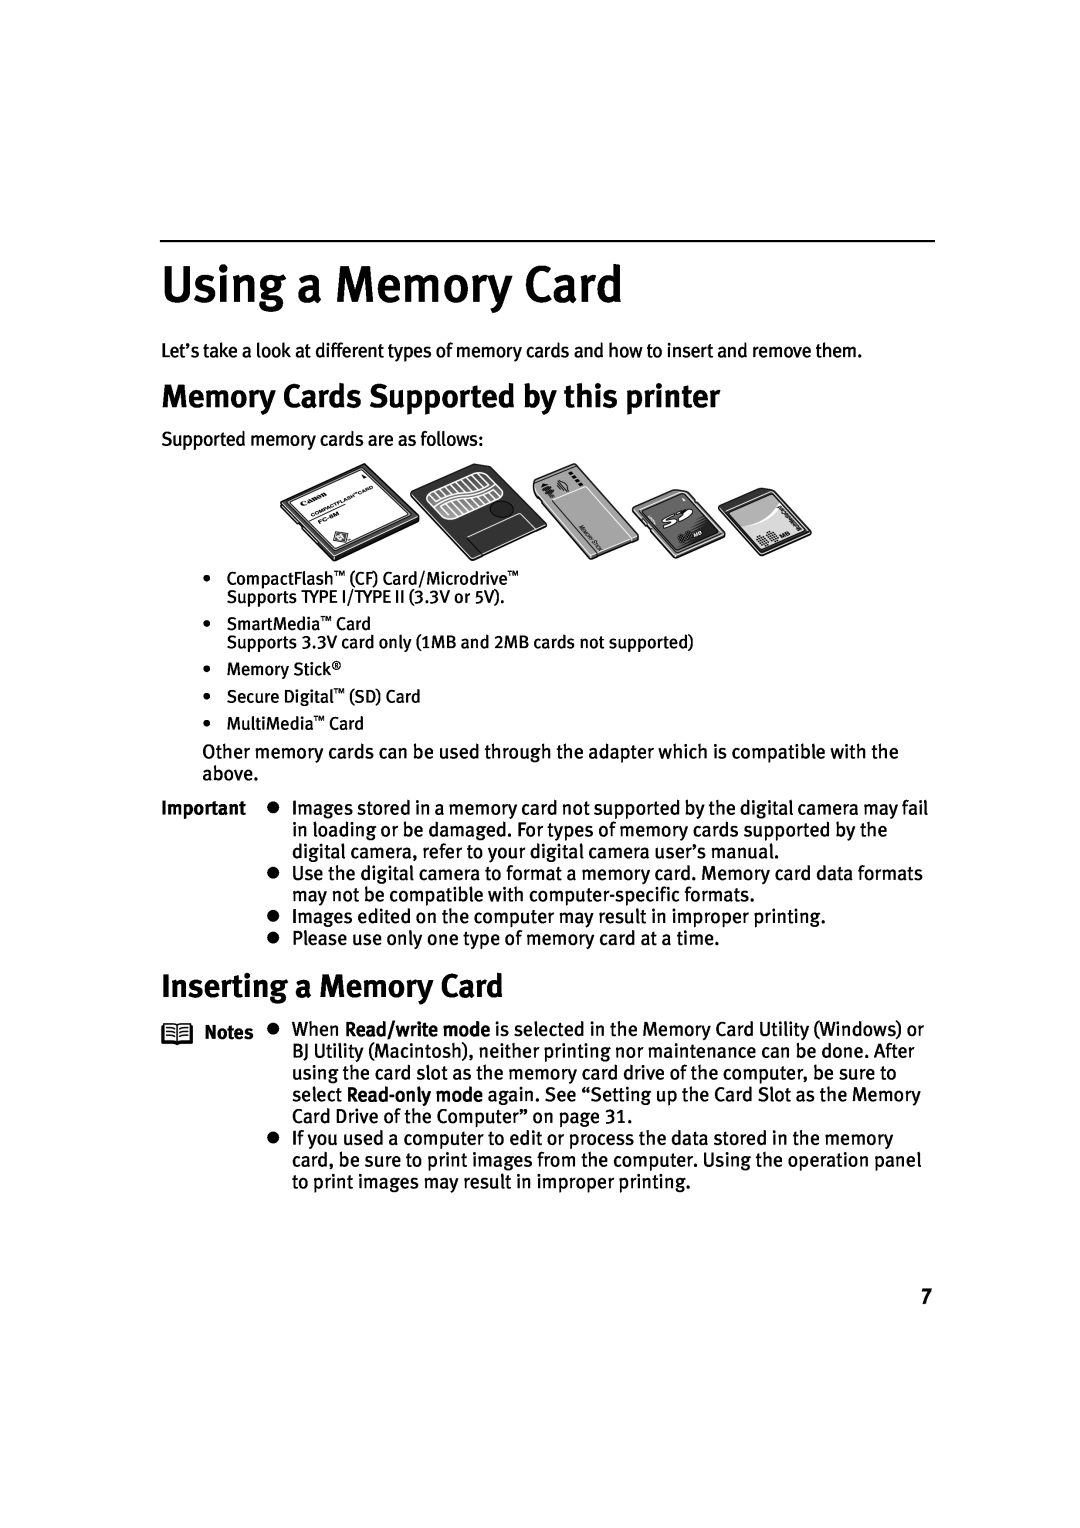 Canon 900D manual Using a Memory Card, Memory Cards Supported by this printer, Inserting a Memory Card 